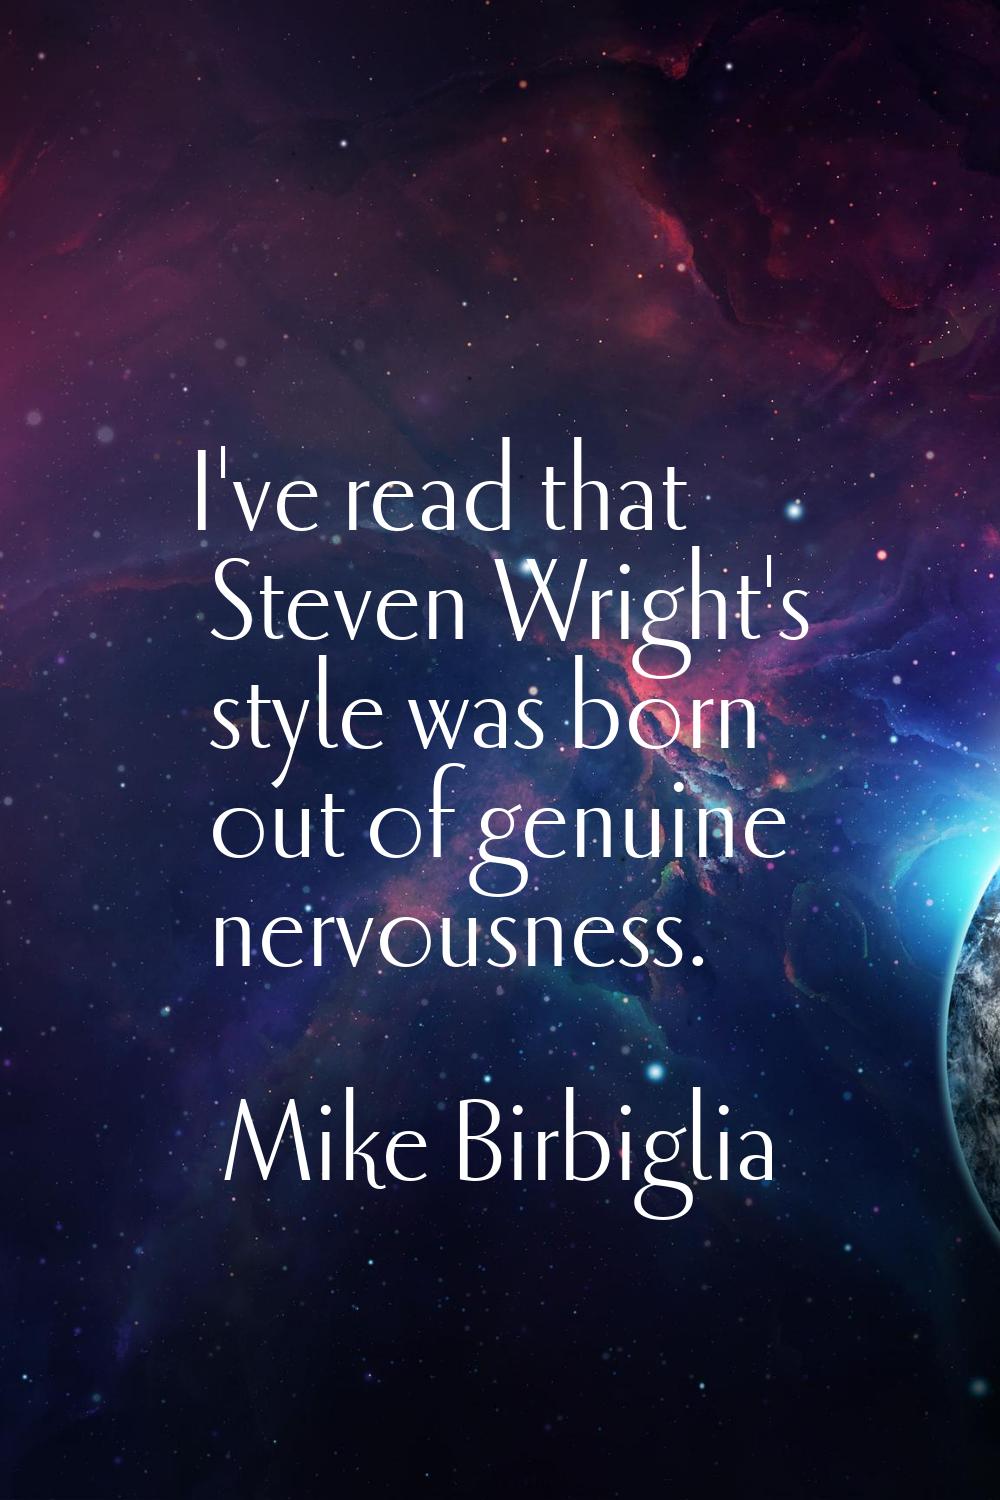 I've read that Steven Wright's style was born out of genuine nervousness.